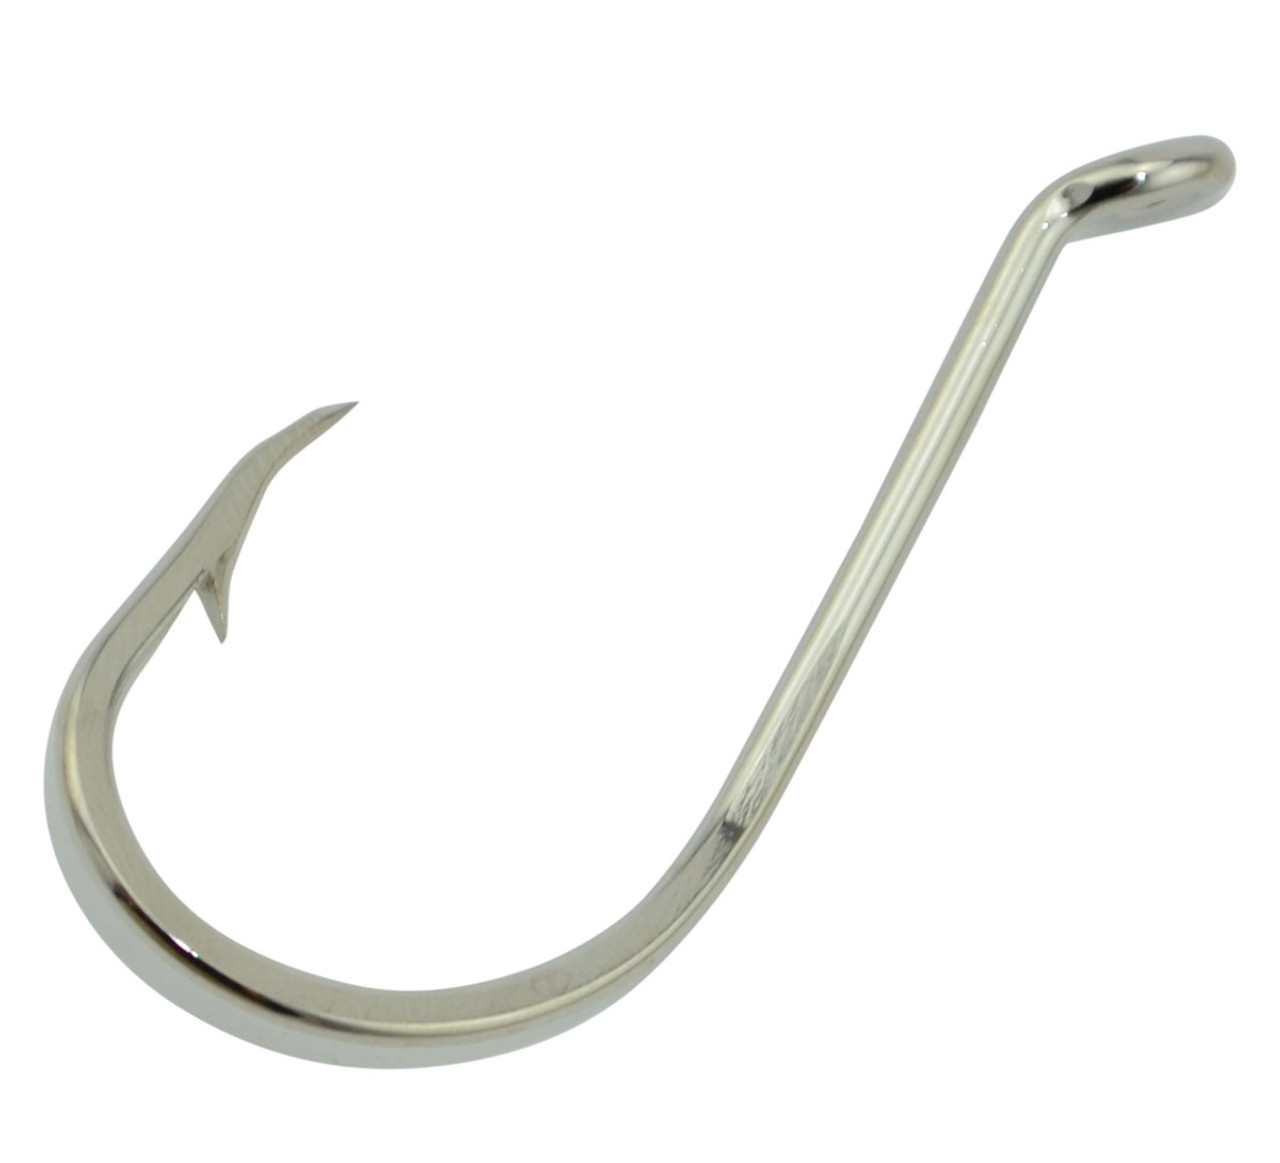 download the last version for apple Fishing Hook